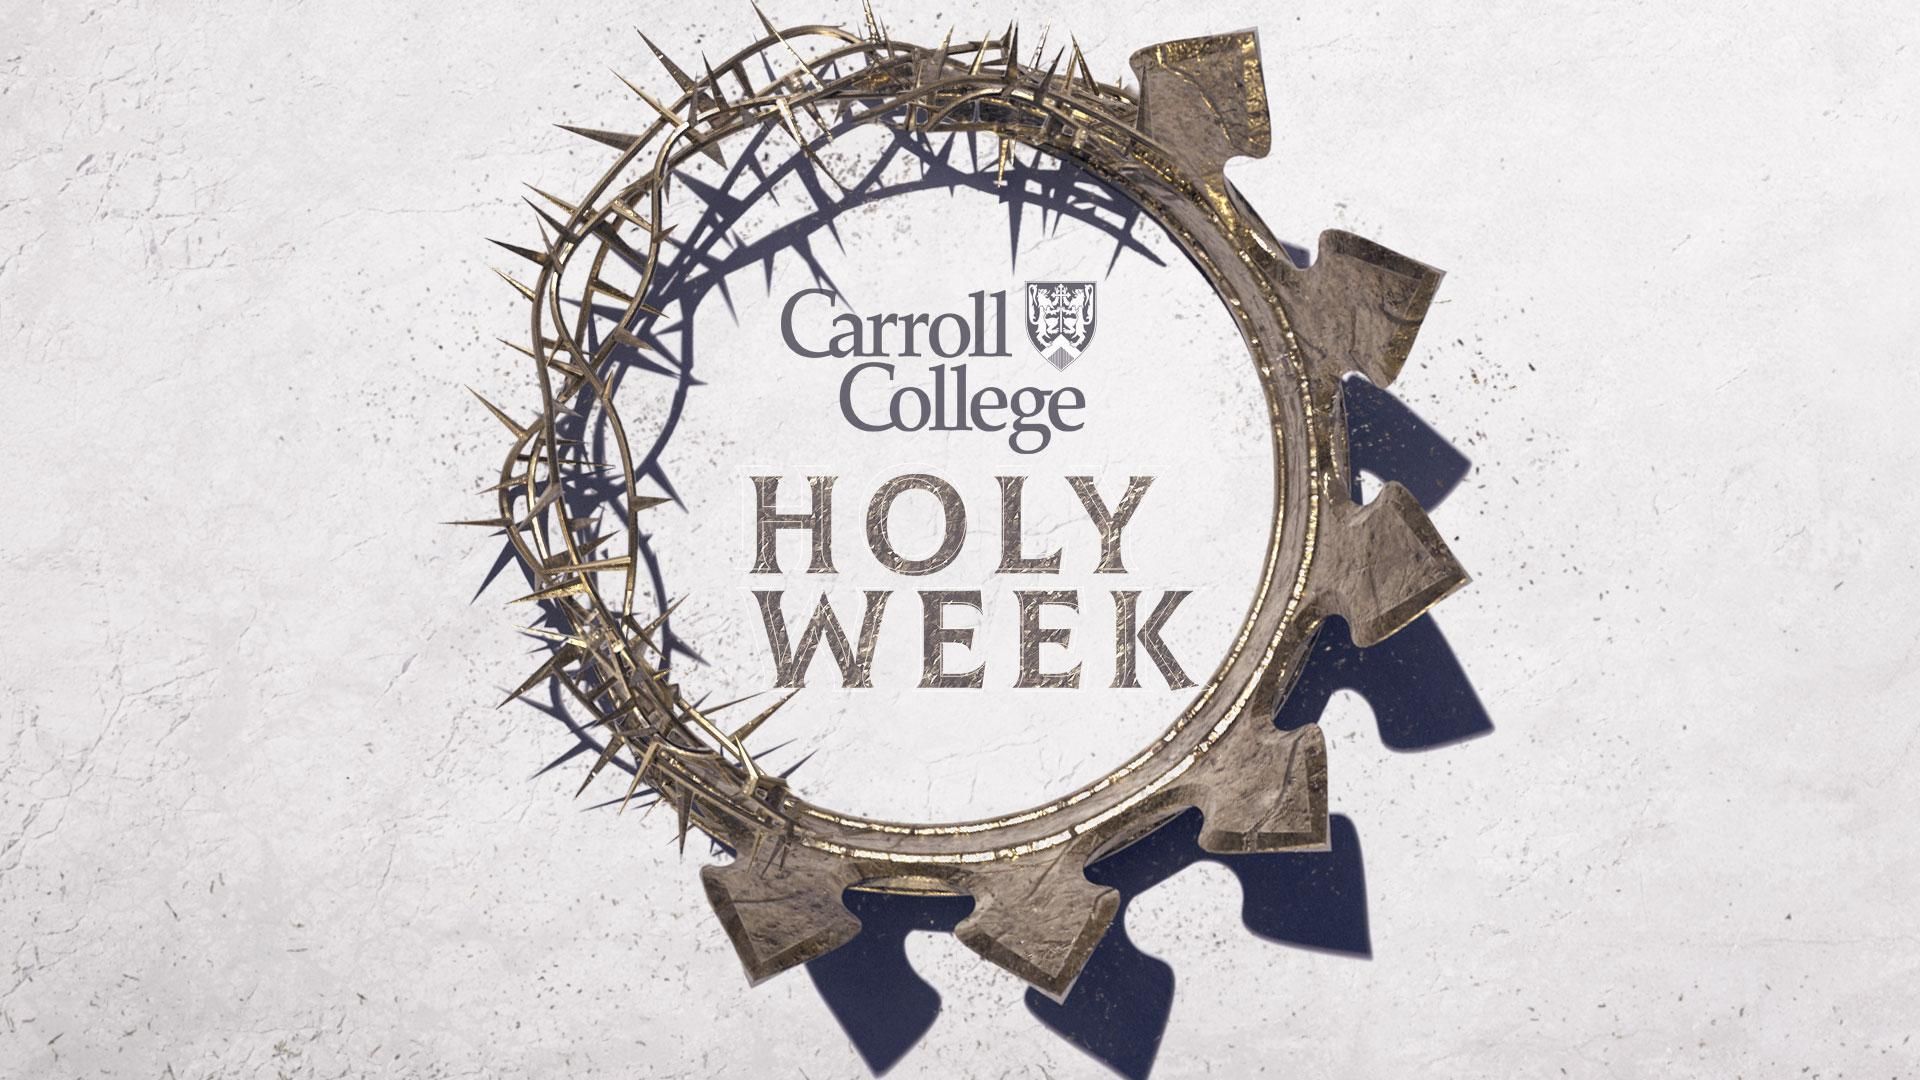 Holy Week Graphic